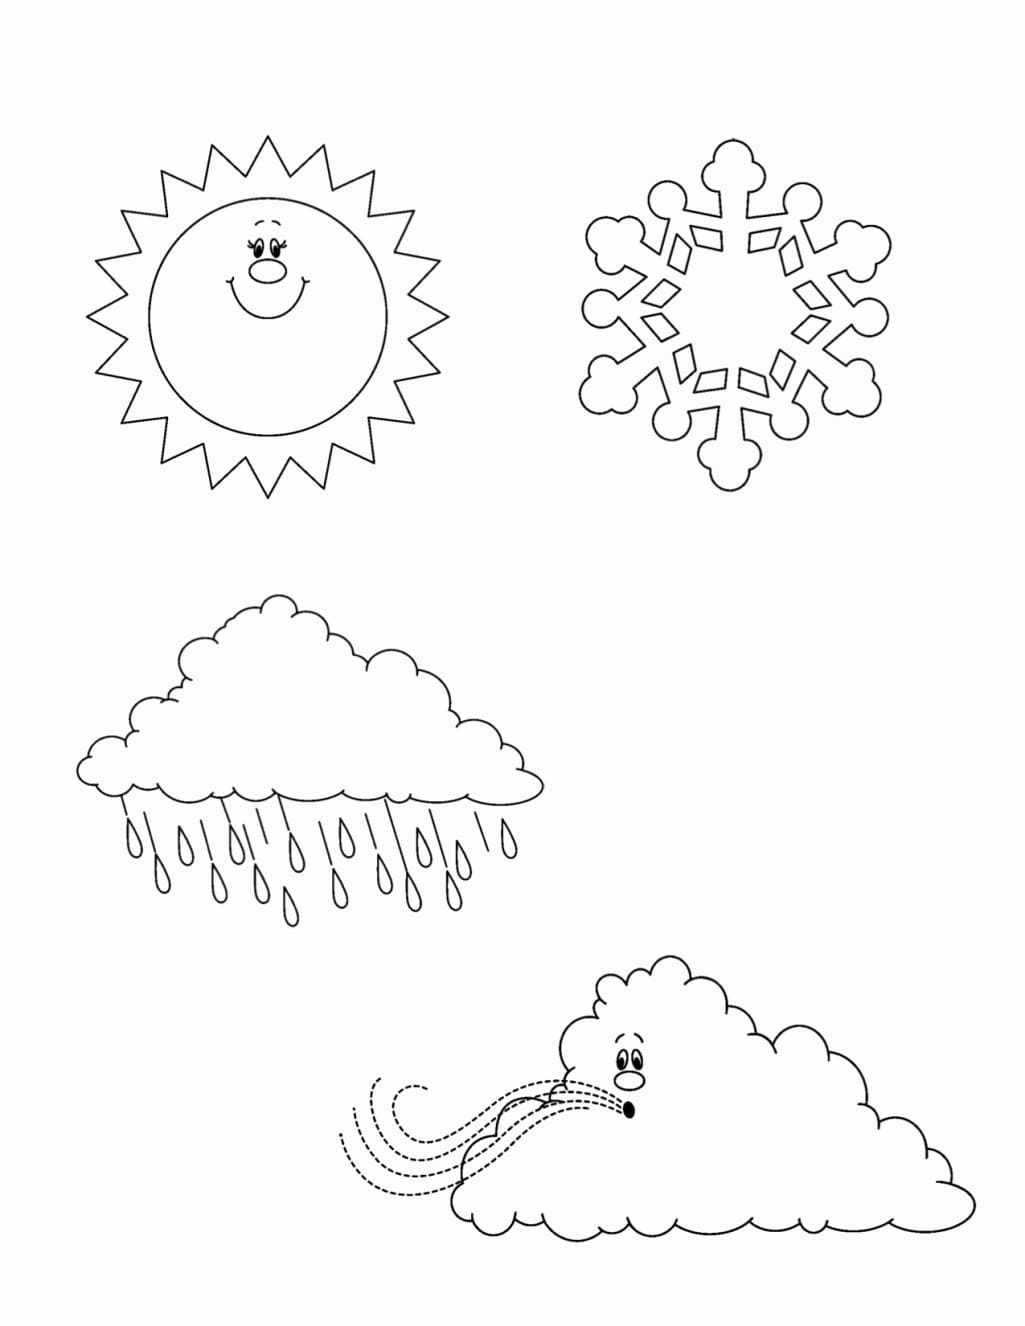 Free Weather to Color Coloring Page - Free Printable Coloring Pages for Kids